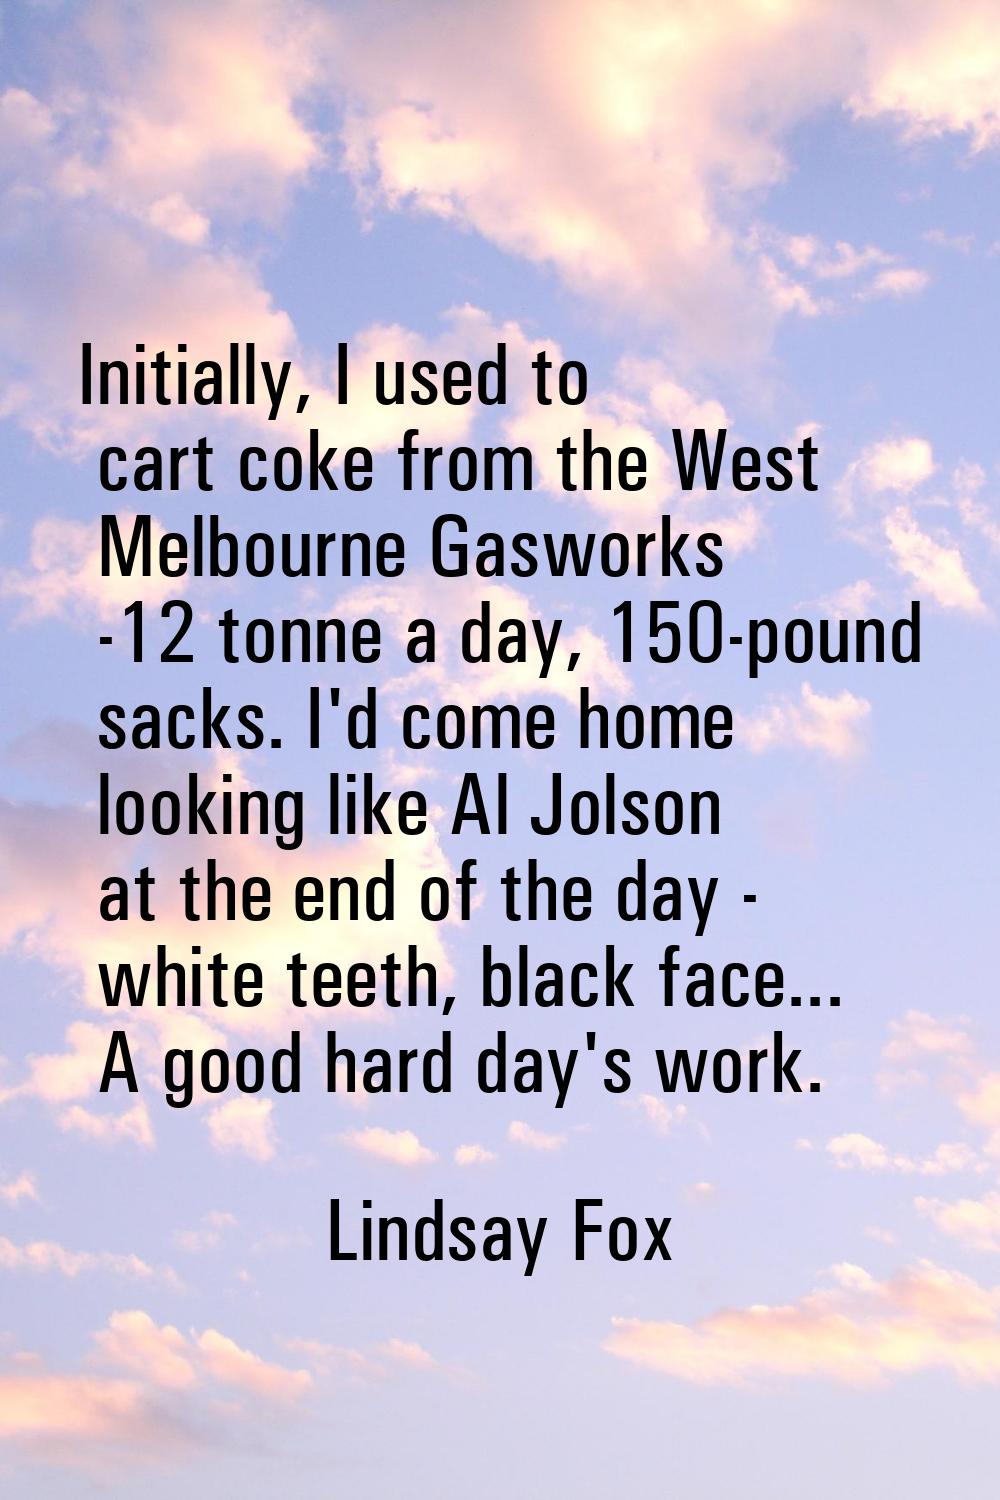 Initially, I used to cart coke from the West Melbourne Gasworks -12 tonne a day, 150-pound sacks. I